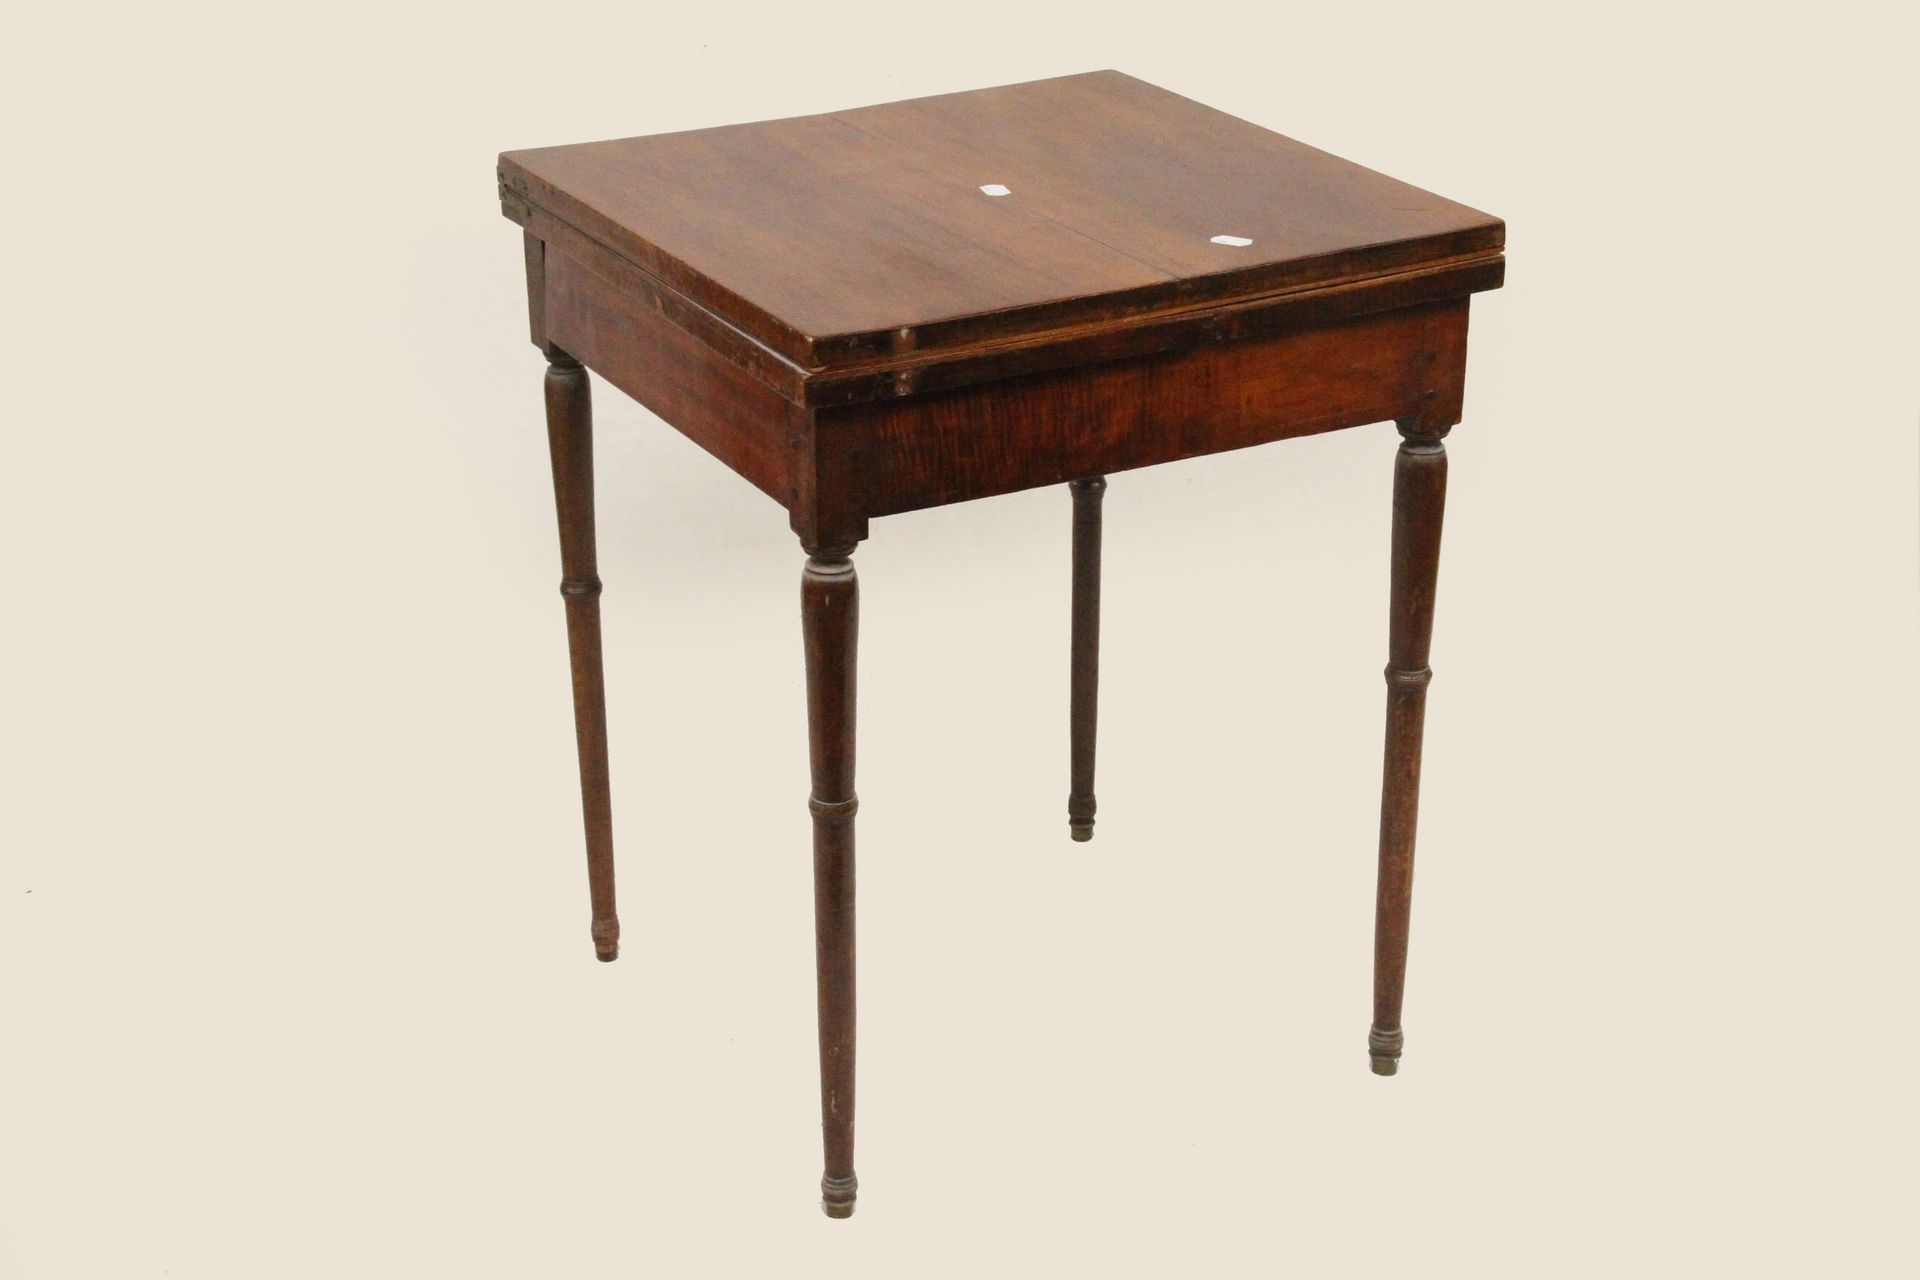 Null GAME TABLE IN CASHWOOD AND CASHWOOD VENEER 19th century, H 73 x 56 x 58 cm